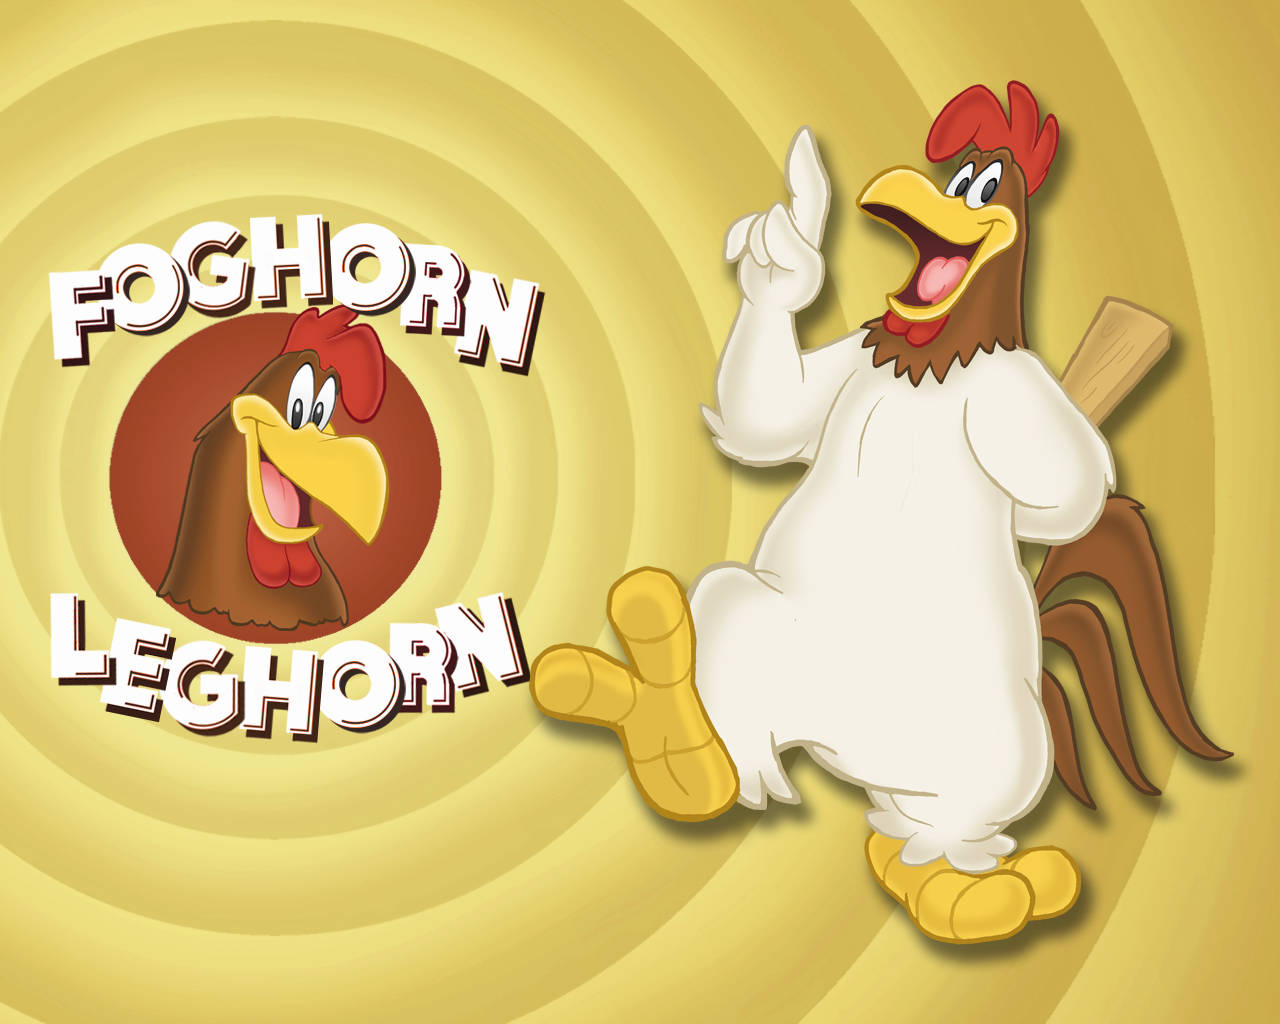 Free Foghorn Leghorn Chicken Hawk Viewing Gallery For Your Desktop, Mobile & Tablet. Explore Foghorn Leghorn Wallpaper. Foghorn Leghorn Wallpaper Background